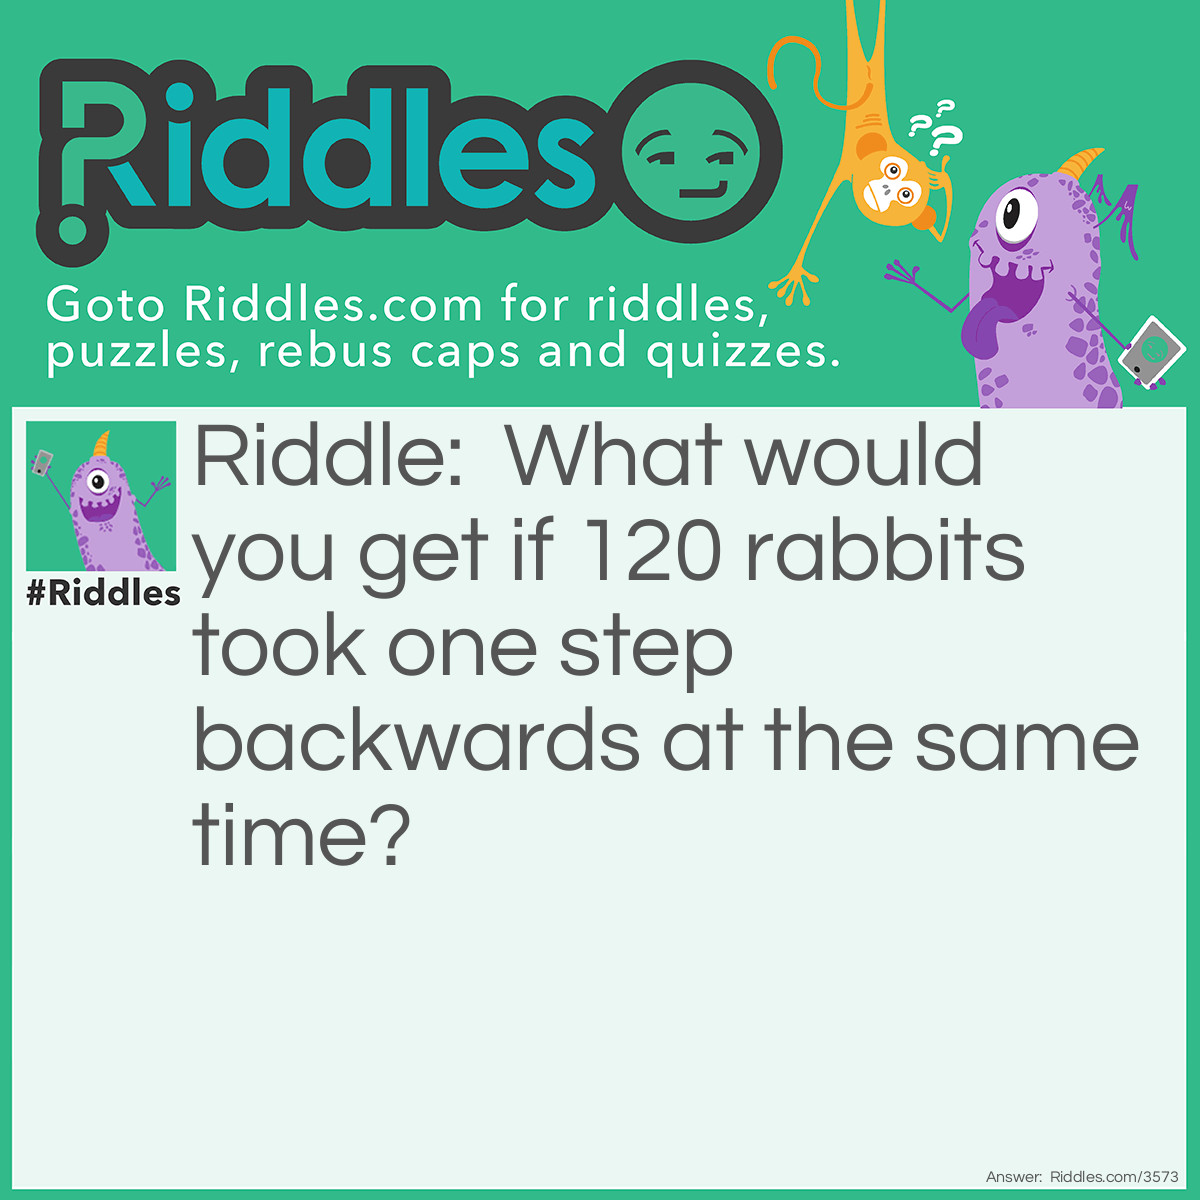 Riddle: What would you get if 120 rabbits took one step backward at the same time? Answer: A receding hair line.